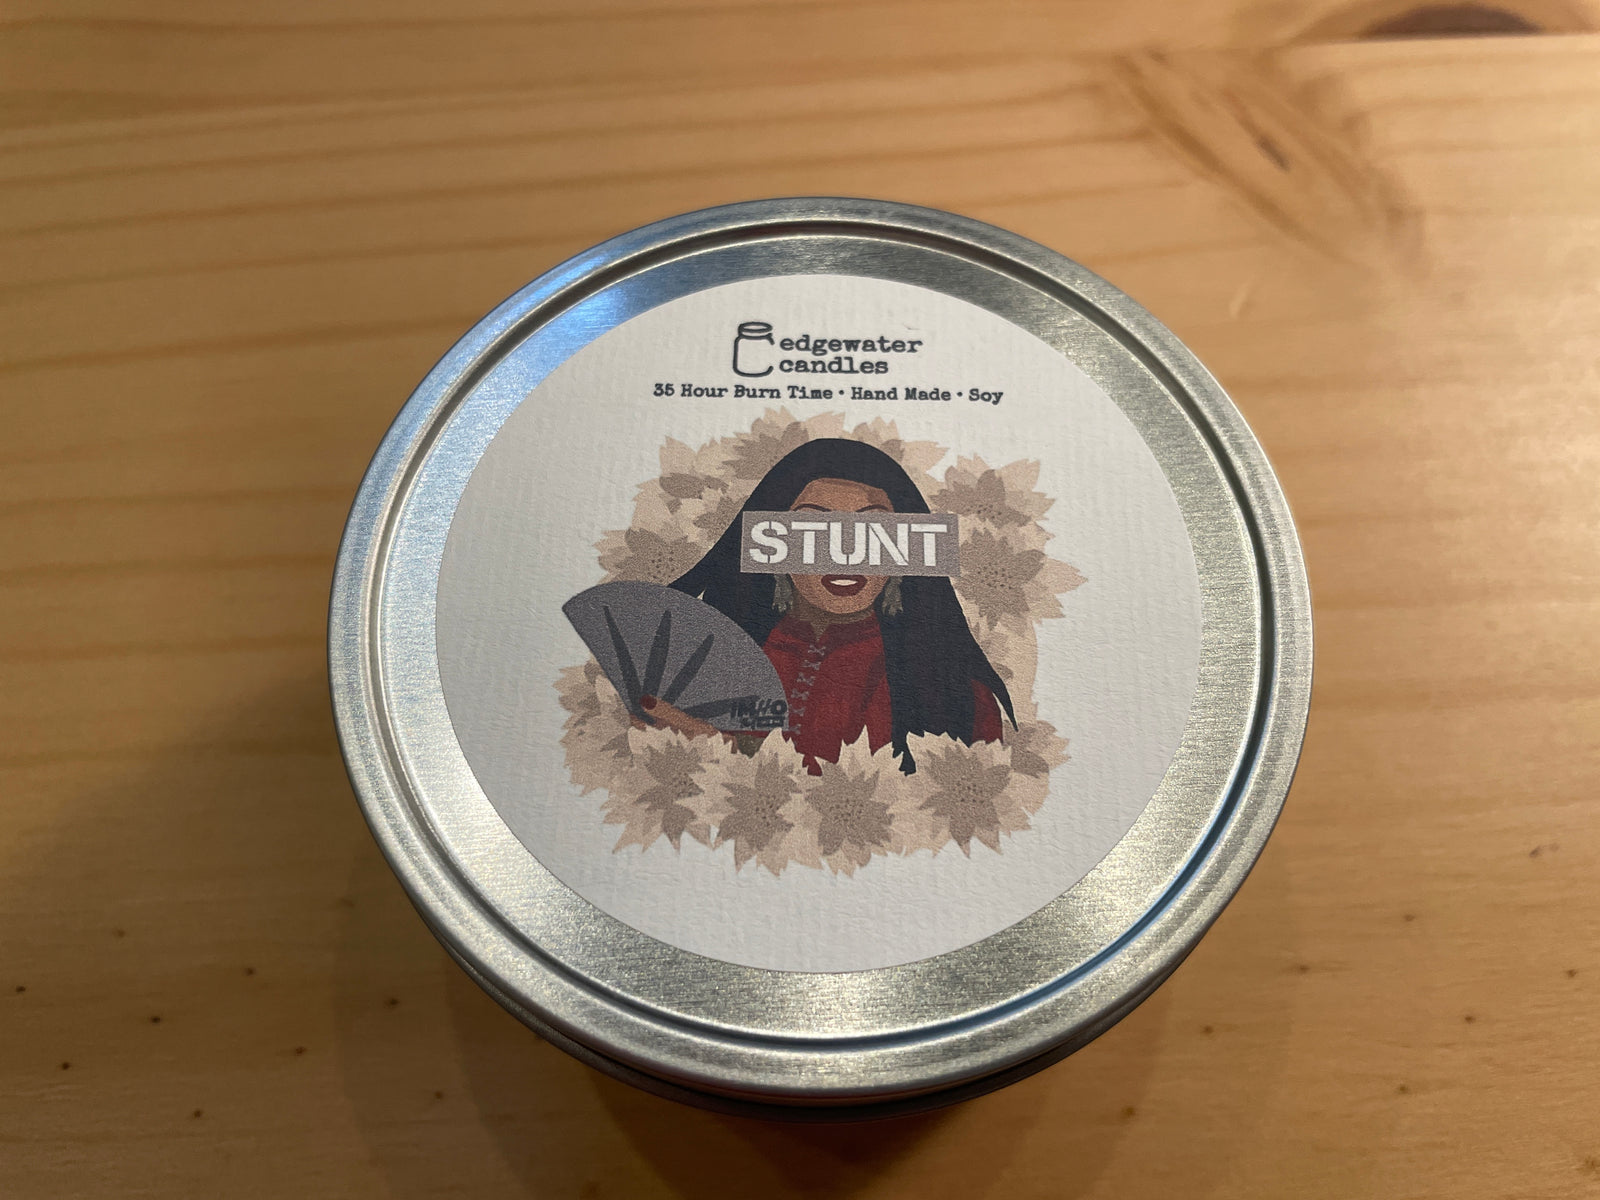 I Smell A Stunt! Custom Candles for IMHO the Show